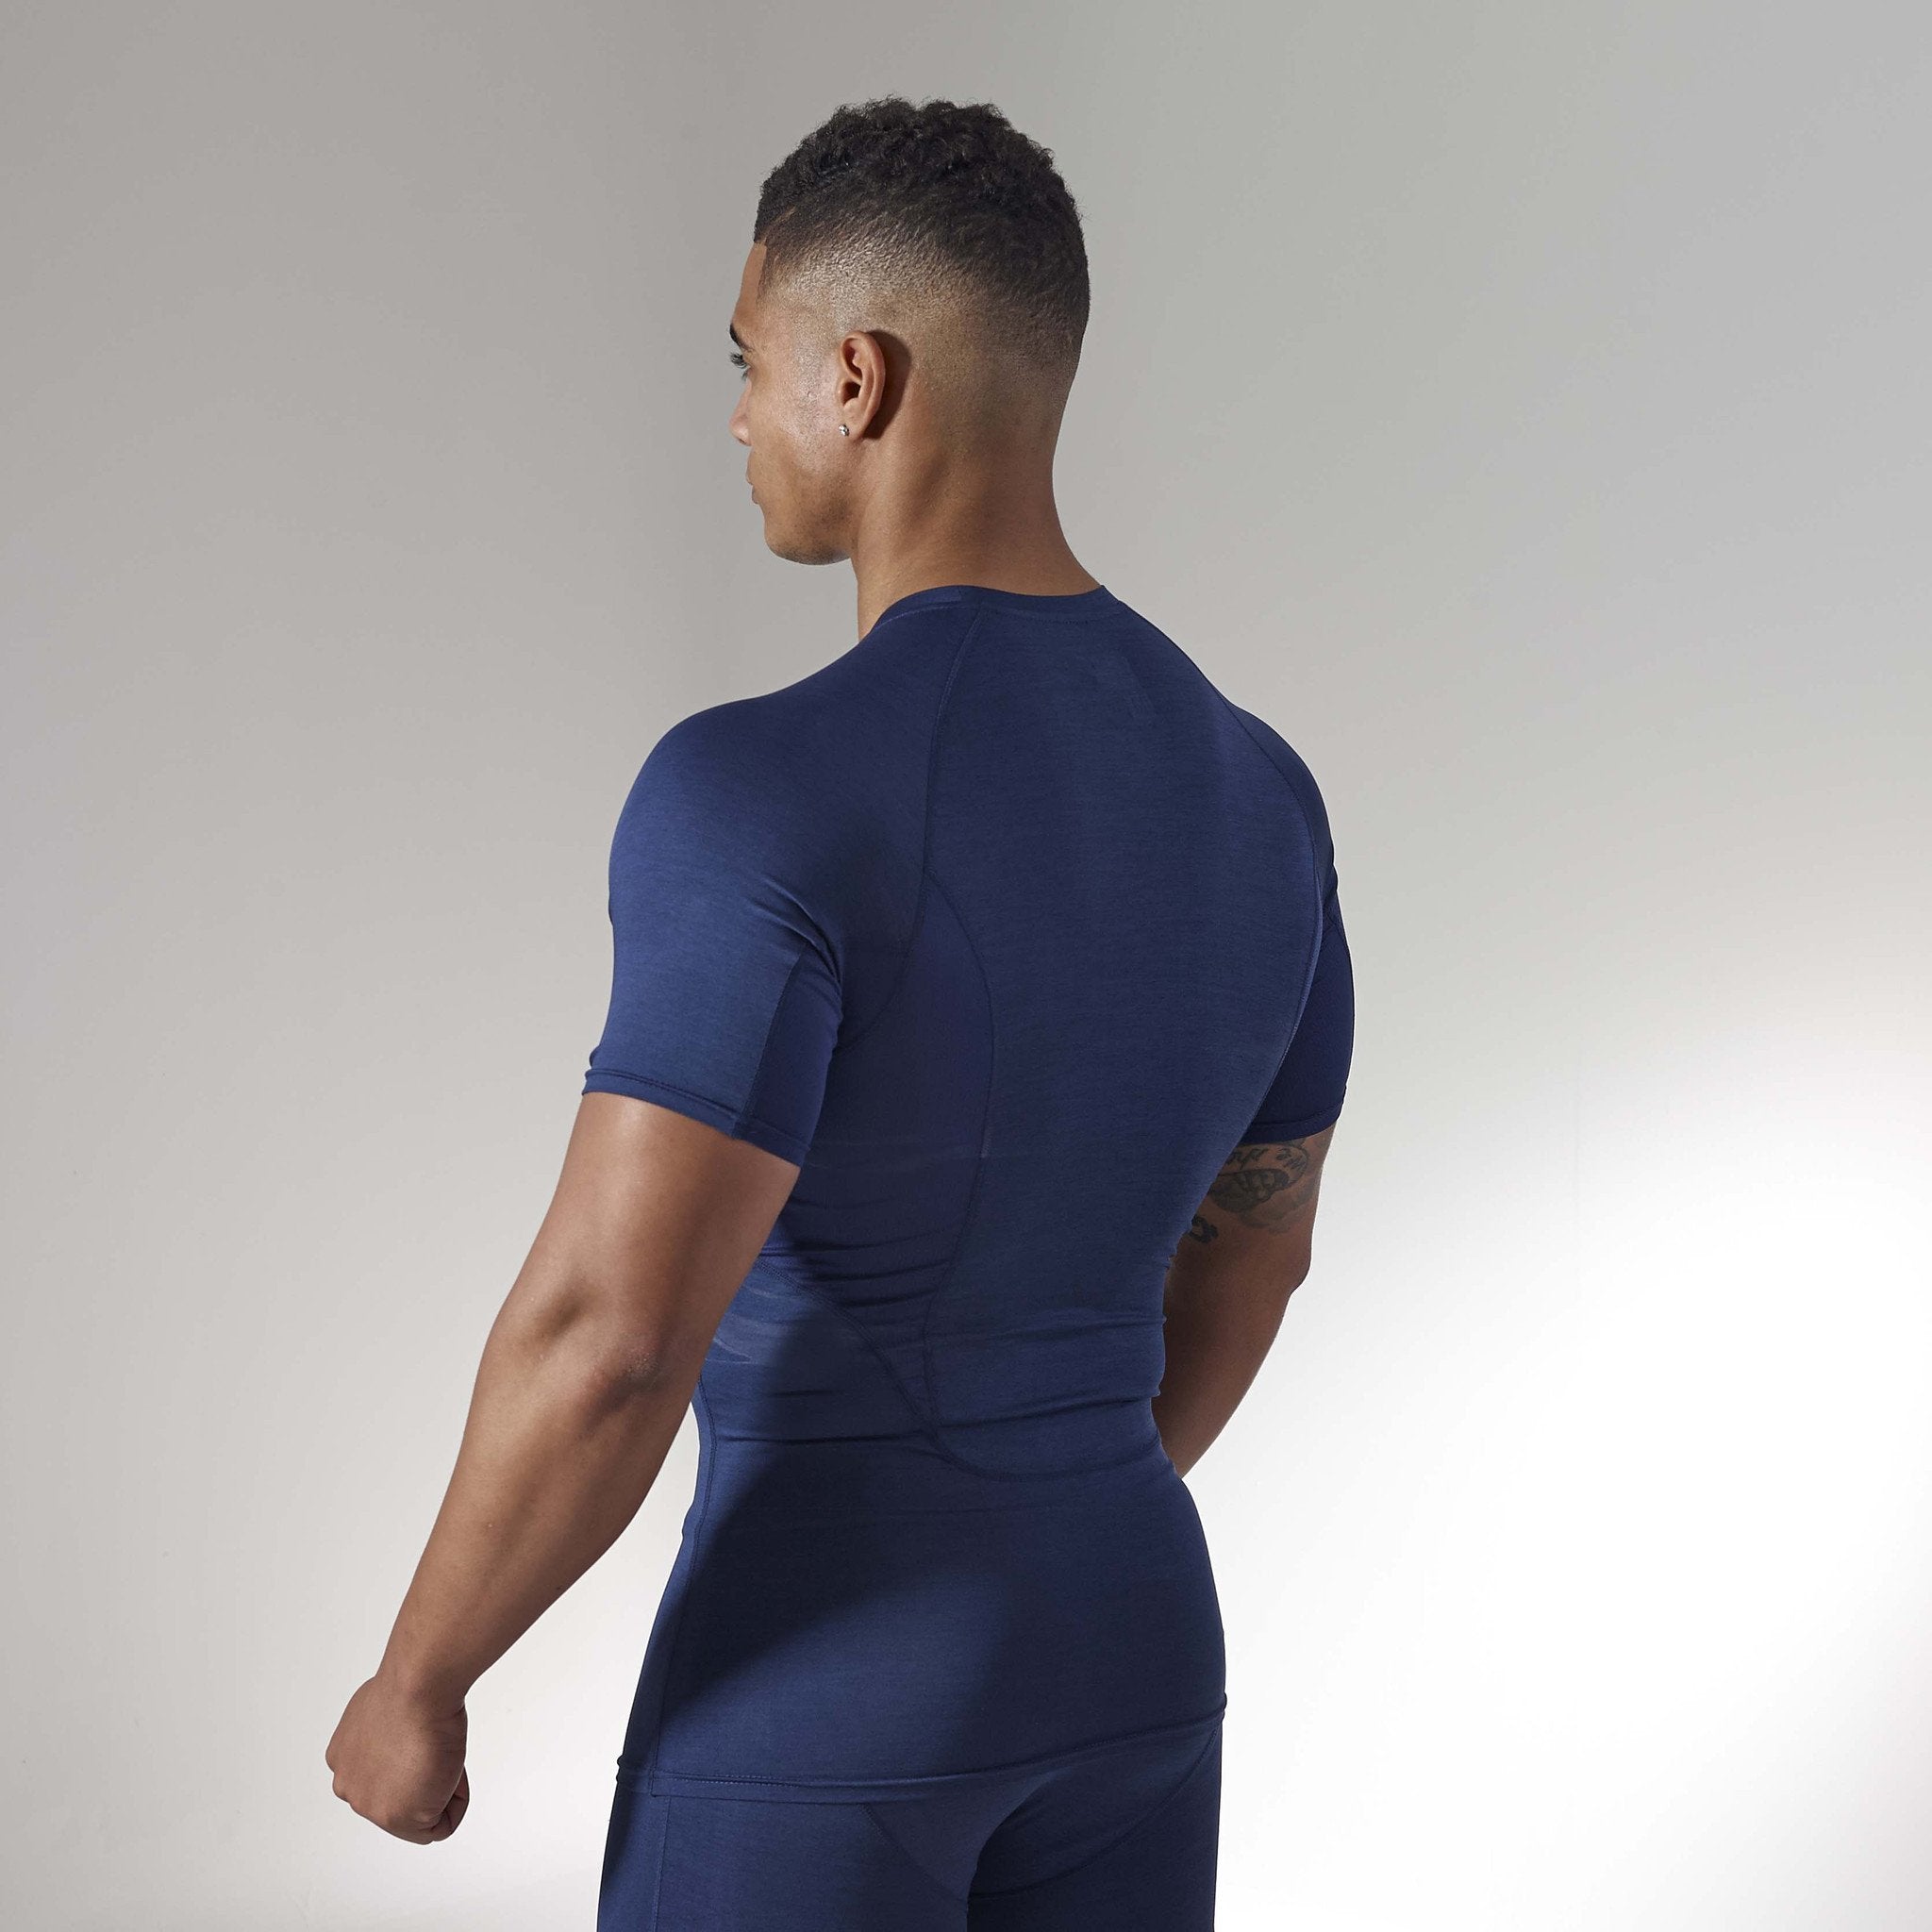 Element Baselayer Short Sleeve Top in Sapphire Blue Marl - view 2